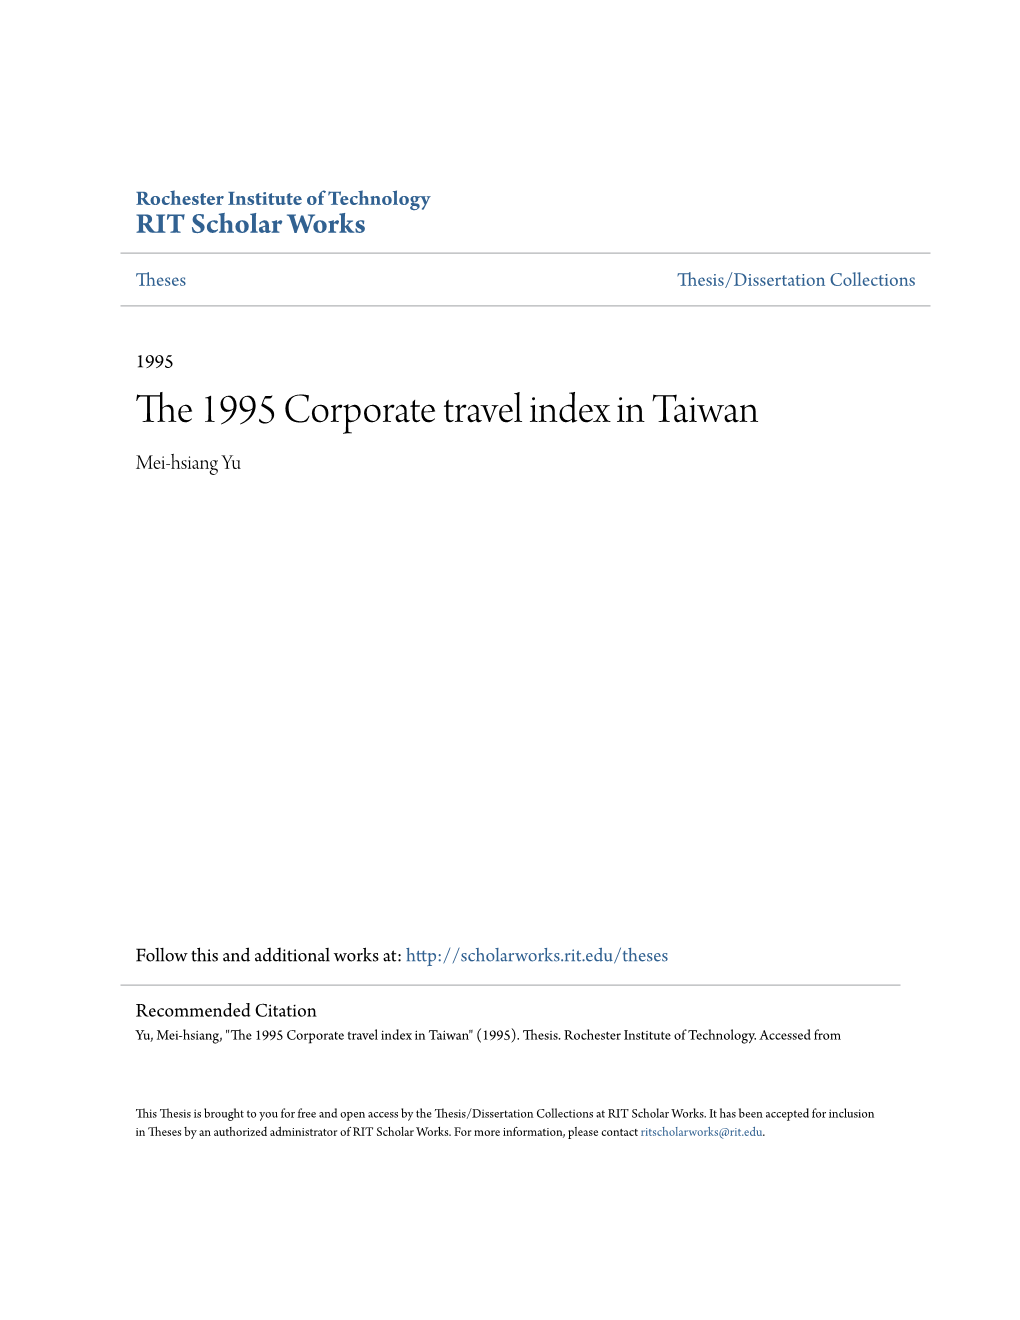 The 1995 Corporate Travel Index in Taiwan